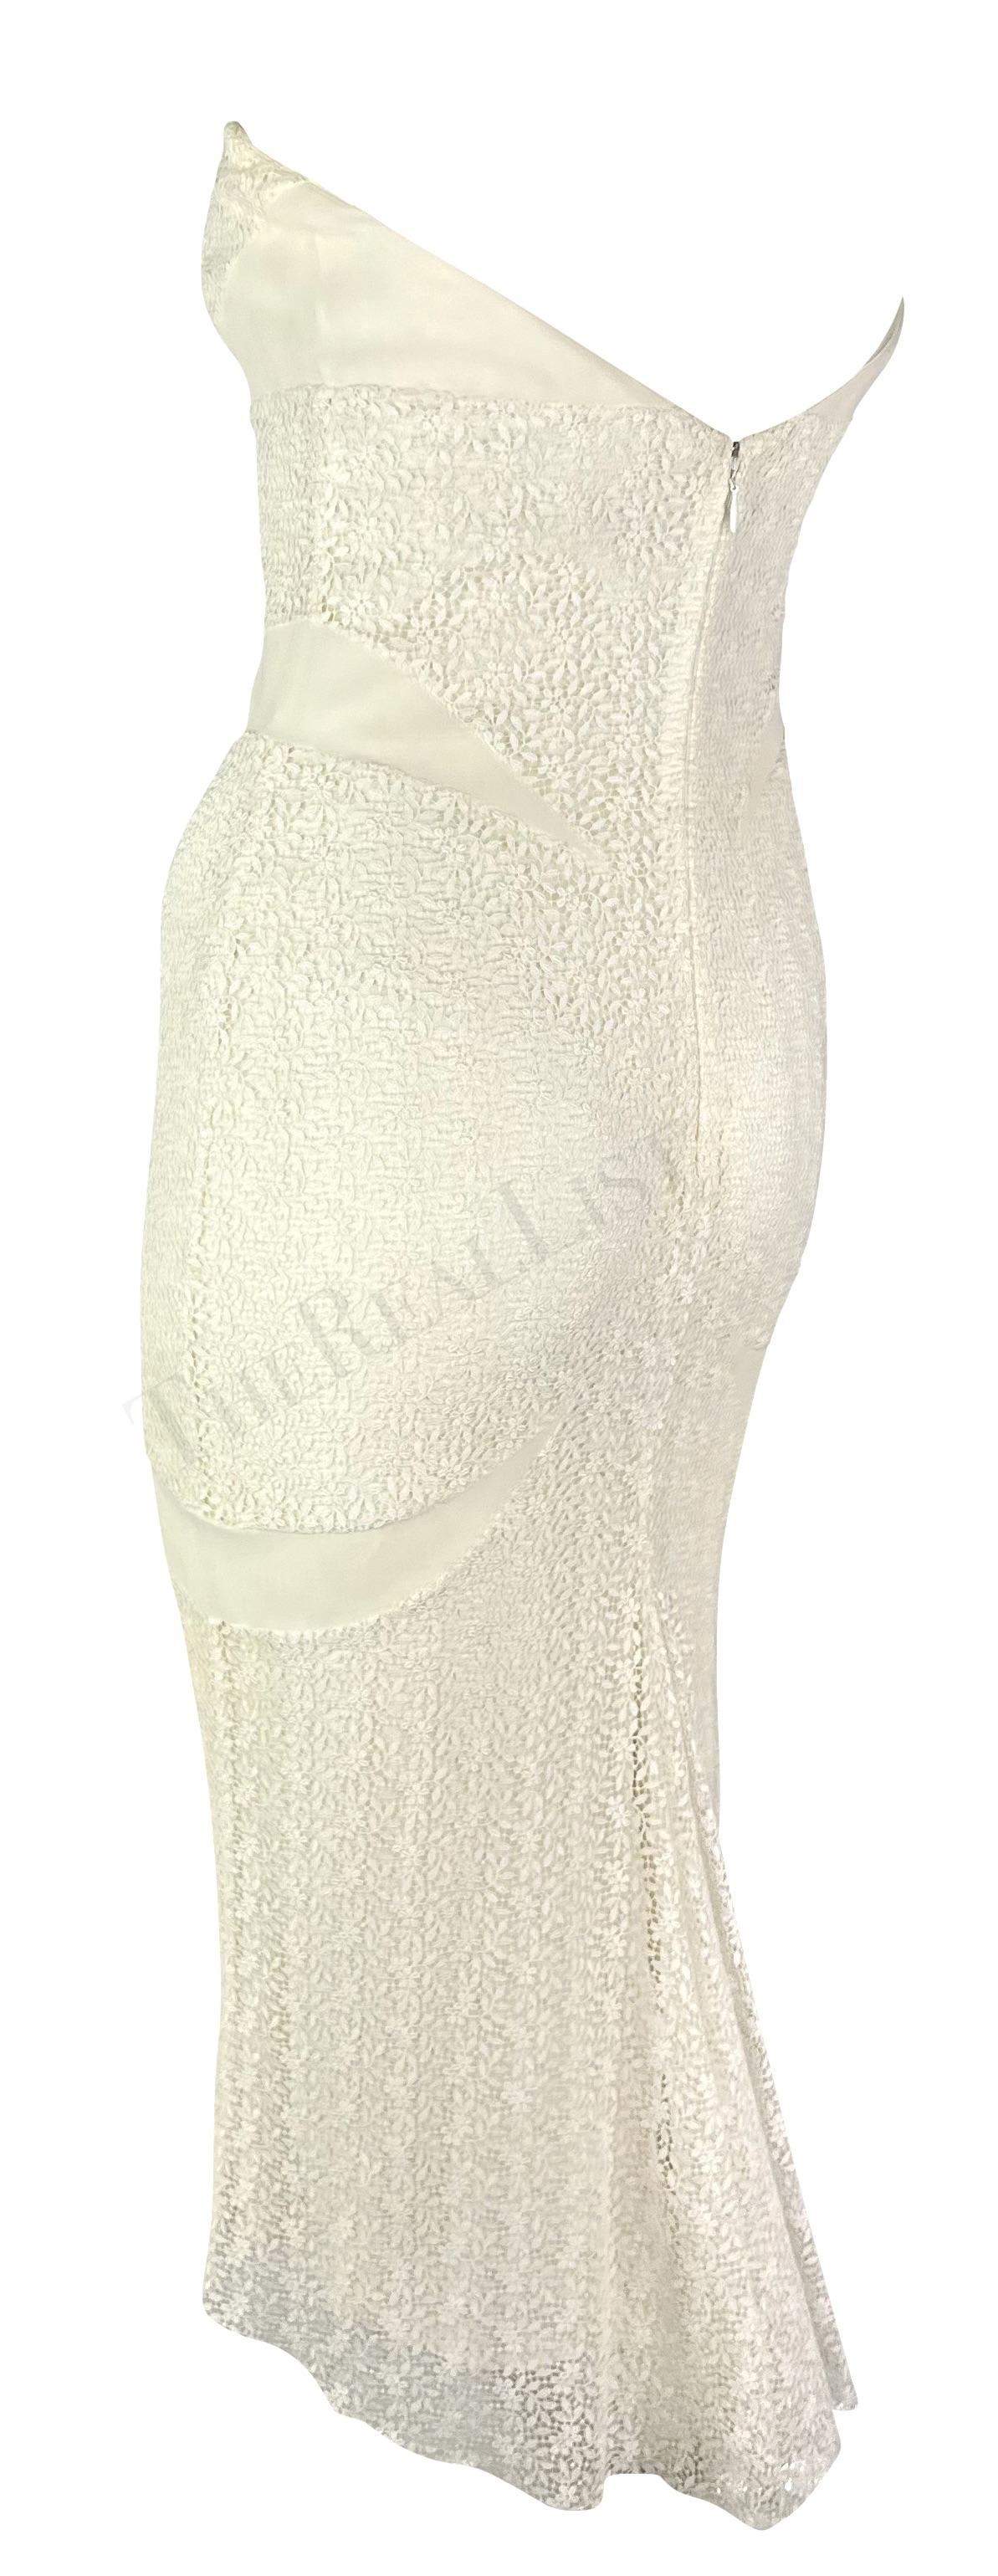 Women's NWT S/S 2002 Gianni Versace by Donatella White Floral Lace Strapless Dress For Sale